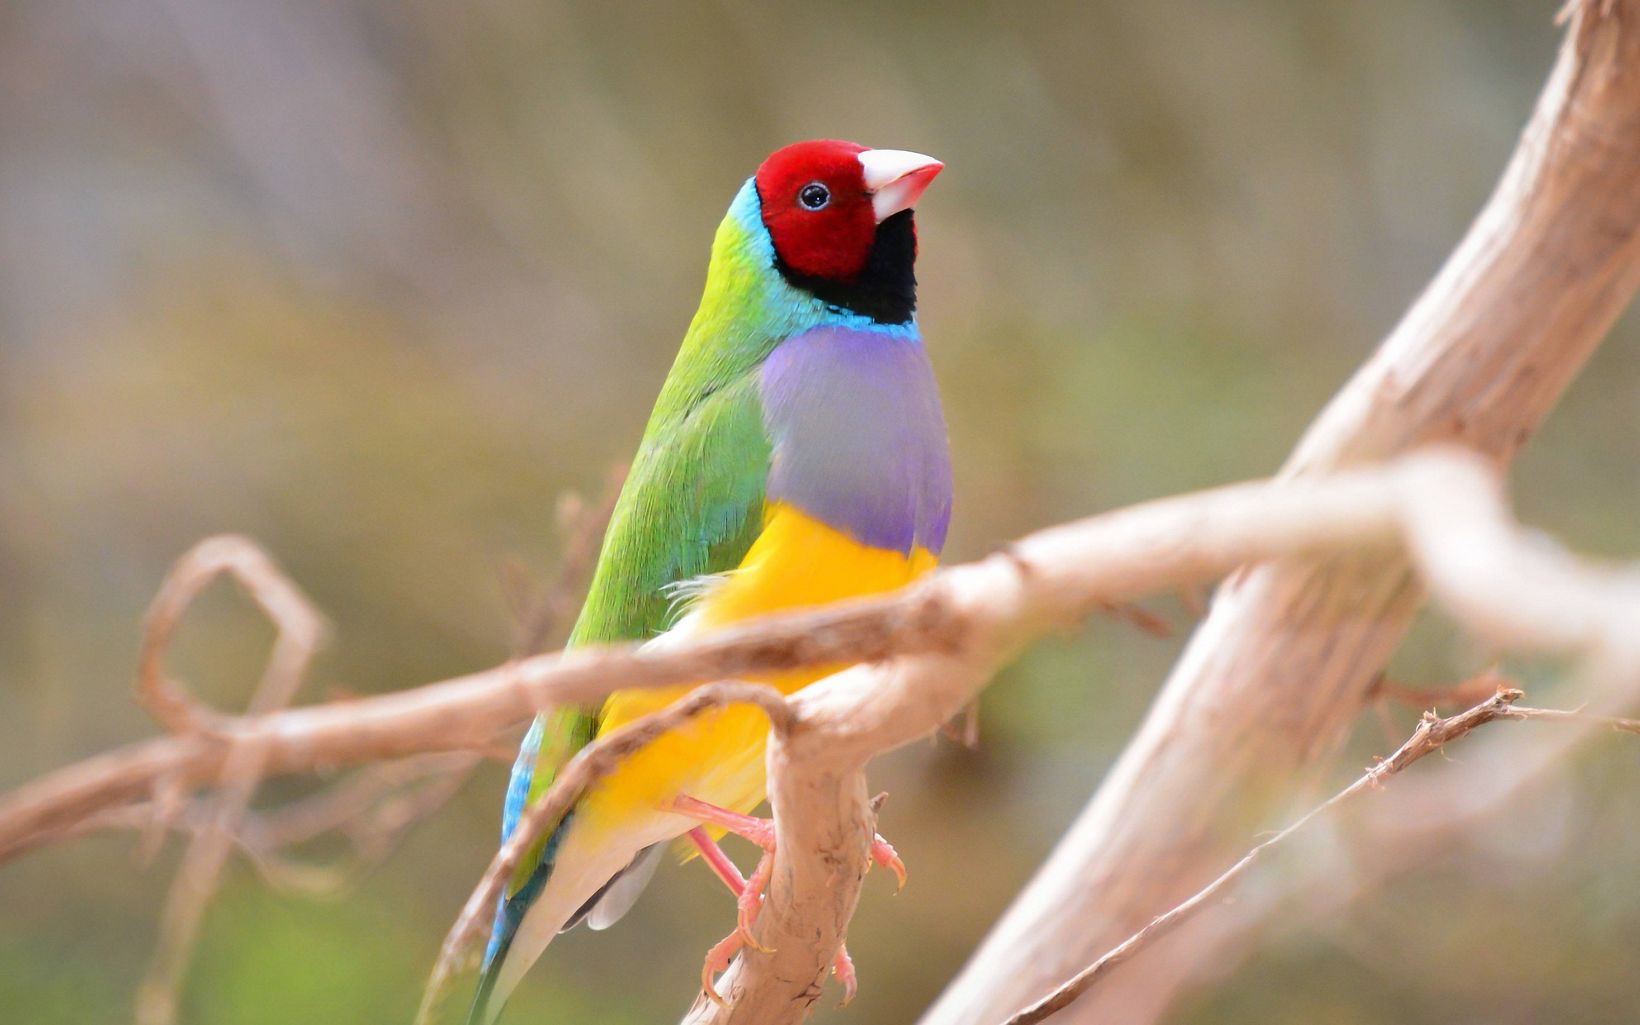 The Gouldian Finch is native to Australia. © Sompreaw